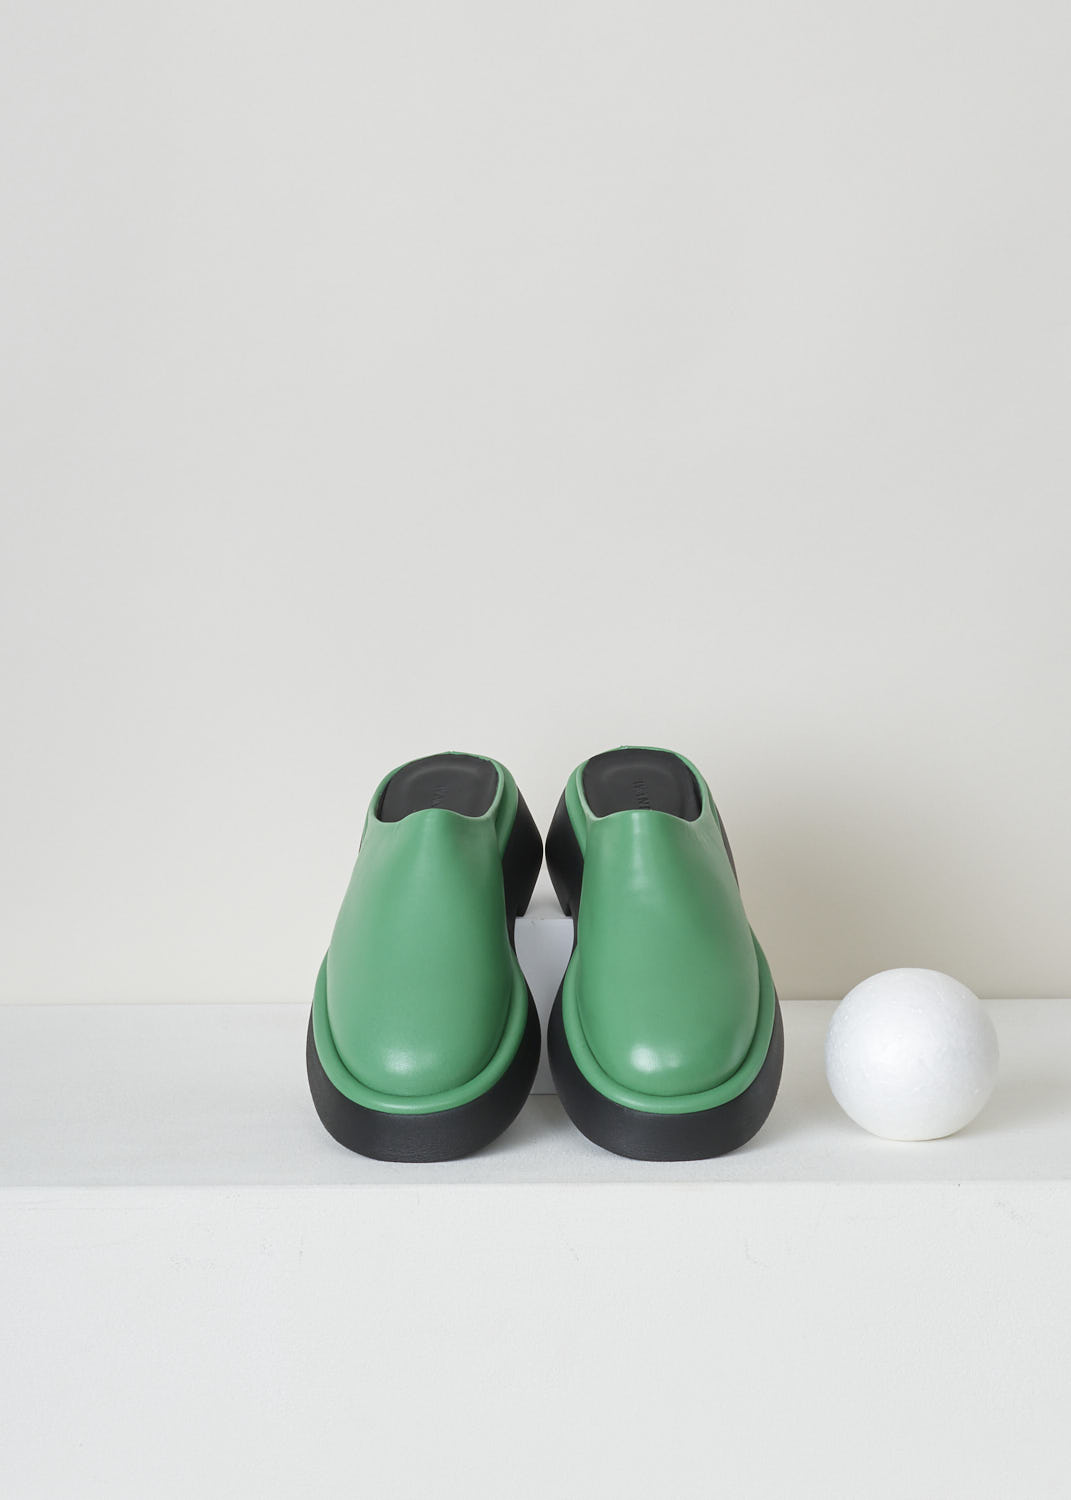 WANDLER, EMERALD GREEN SLIDES, ROSA_SLIDE_22202_741201_2687_EMERALD, Green, Top, These emerald green slip-on slides have a round toe section and flat thick, rubber sole. 
